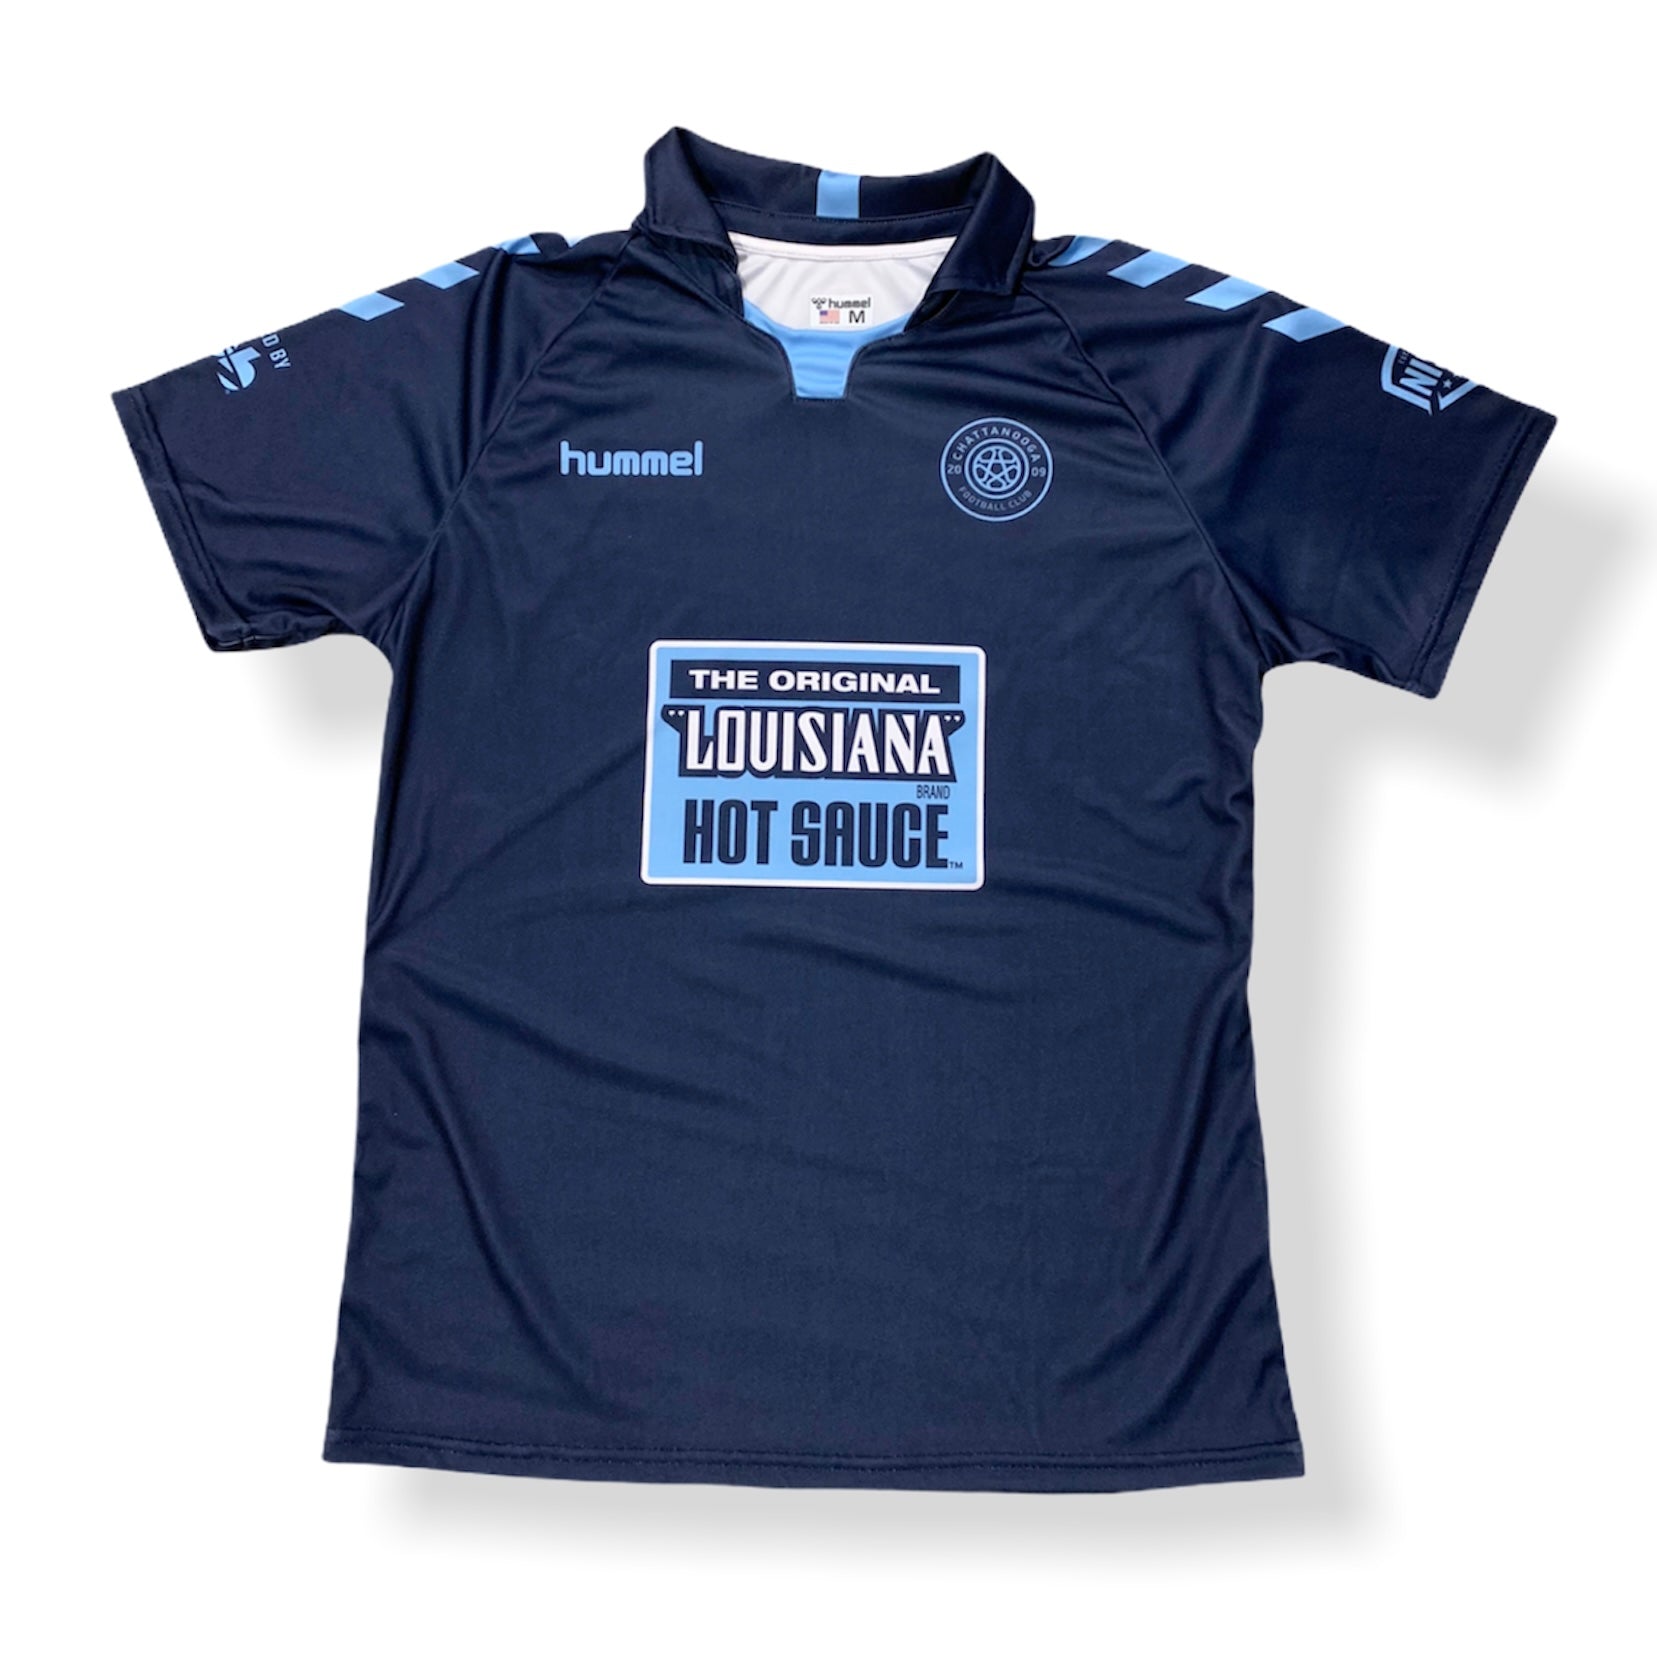 Chattanooga FC Launches Primary Jersey Partnership with Louisiana Hot Sauce